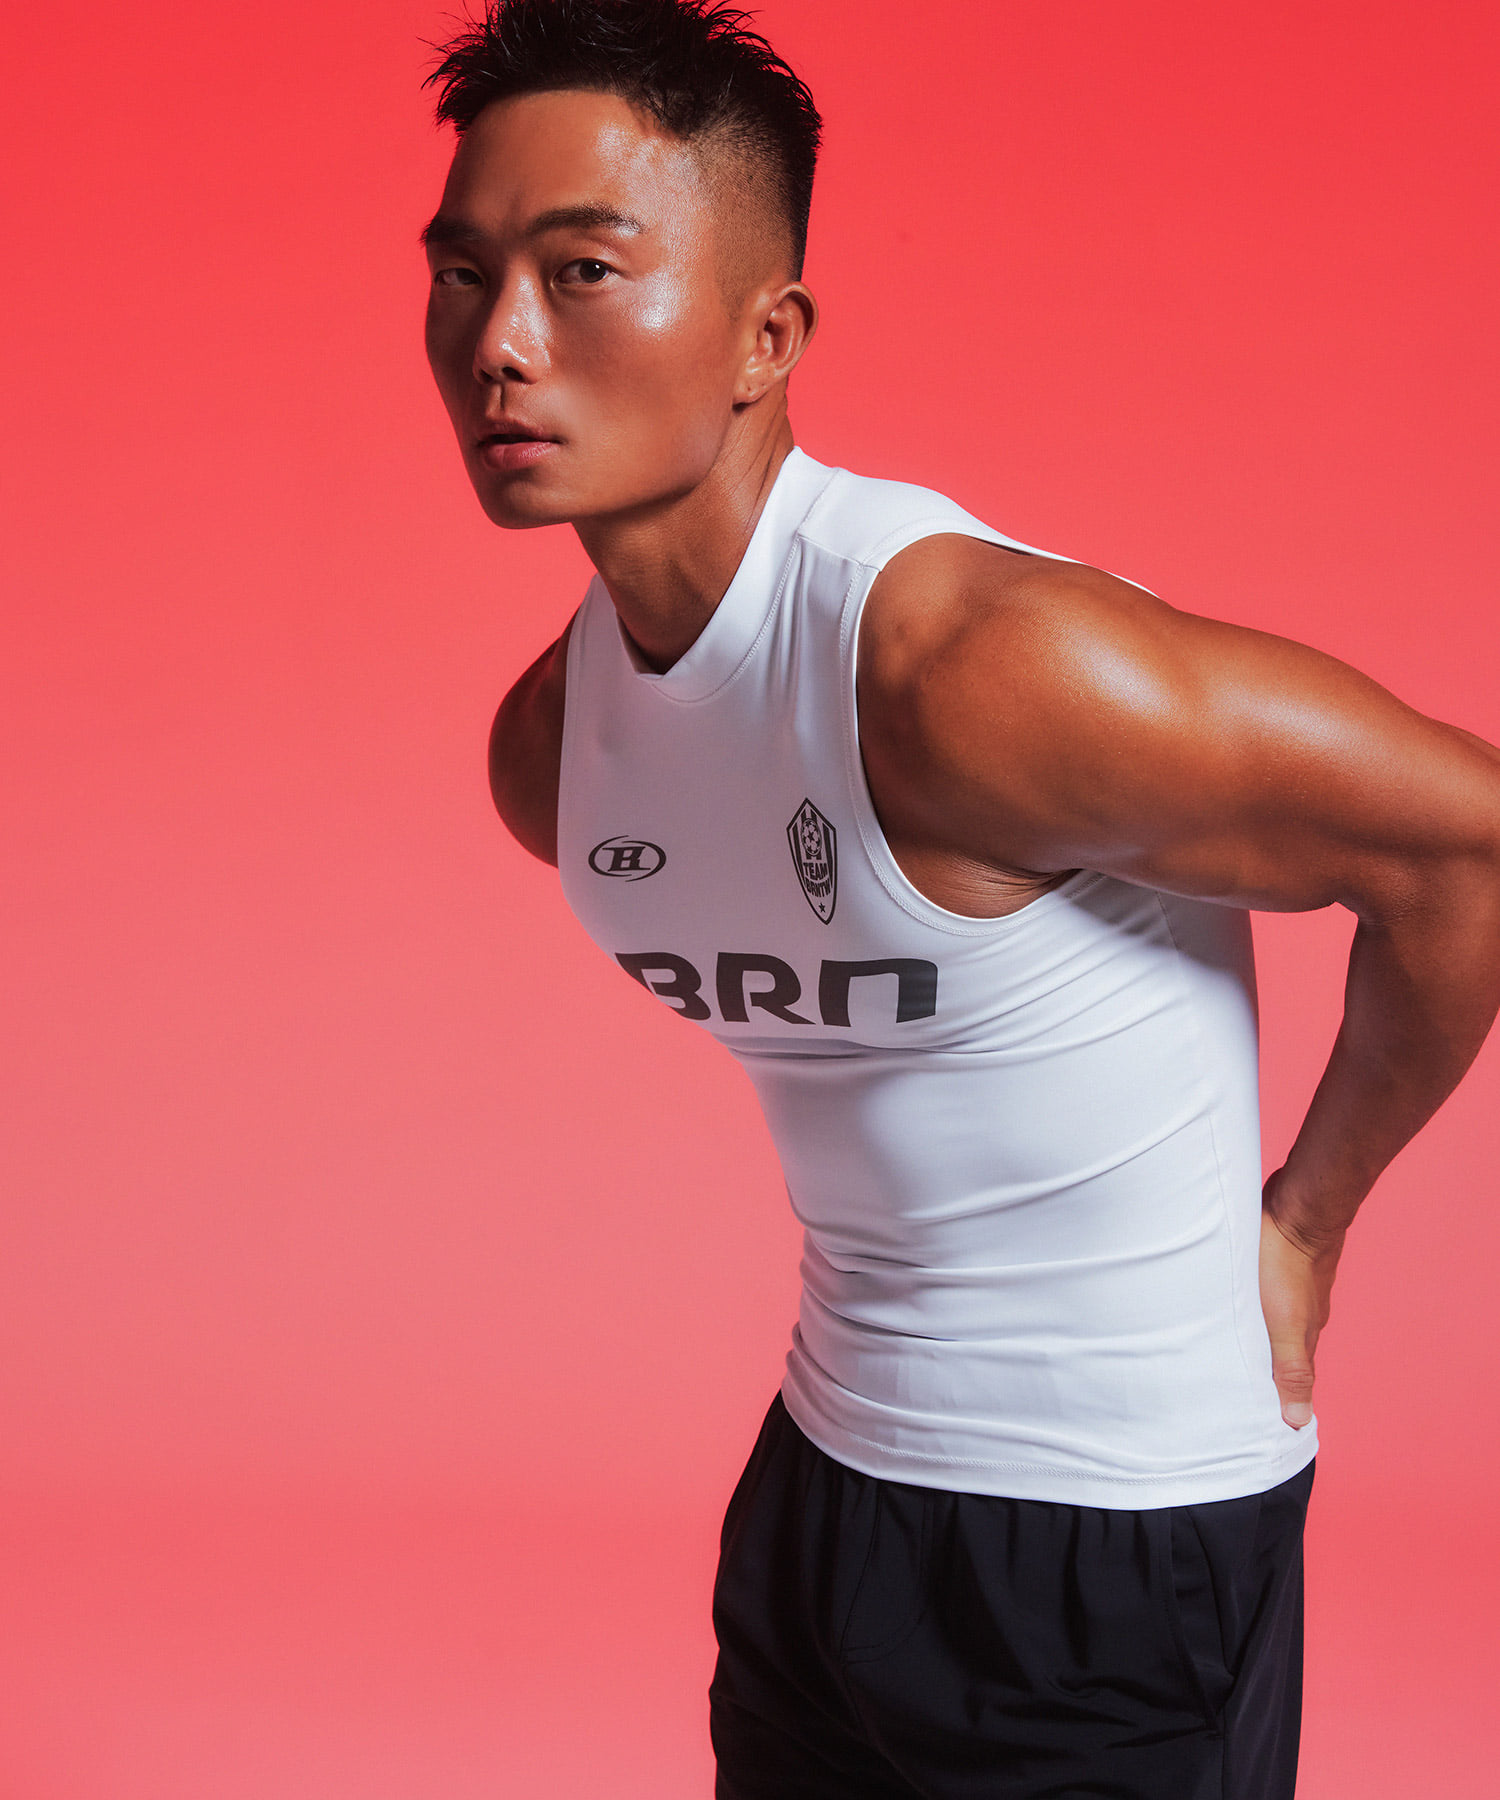 BRN MUSCLE FIT SLEEVELESS [WHITE]